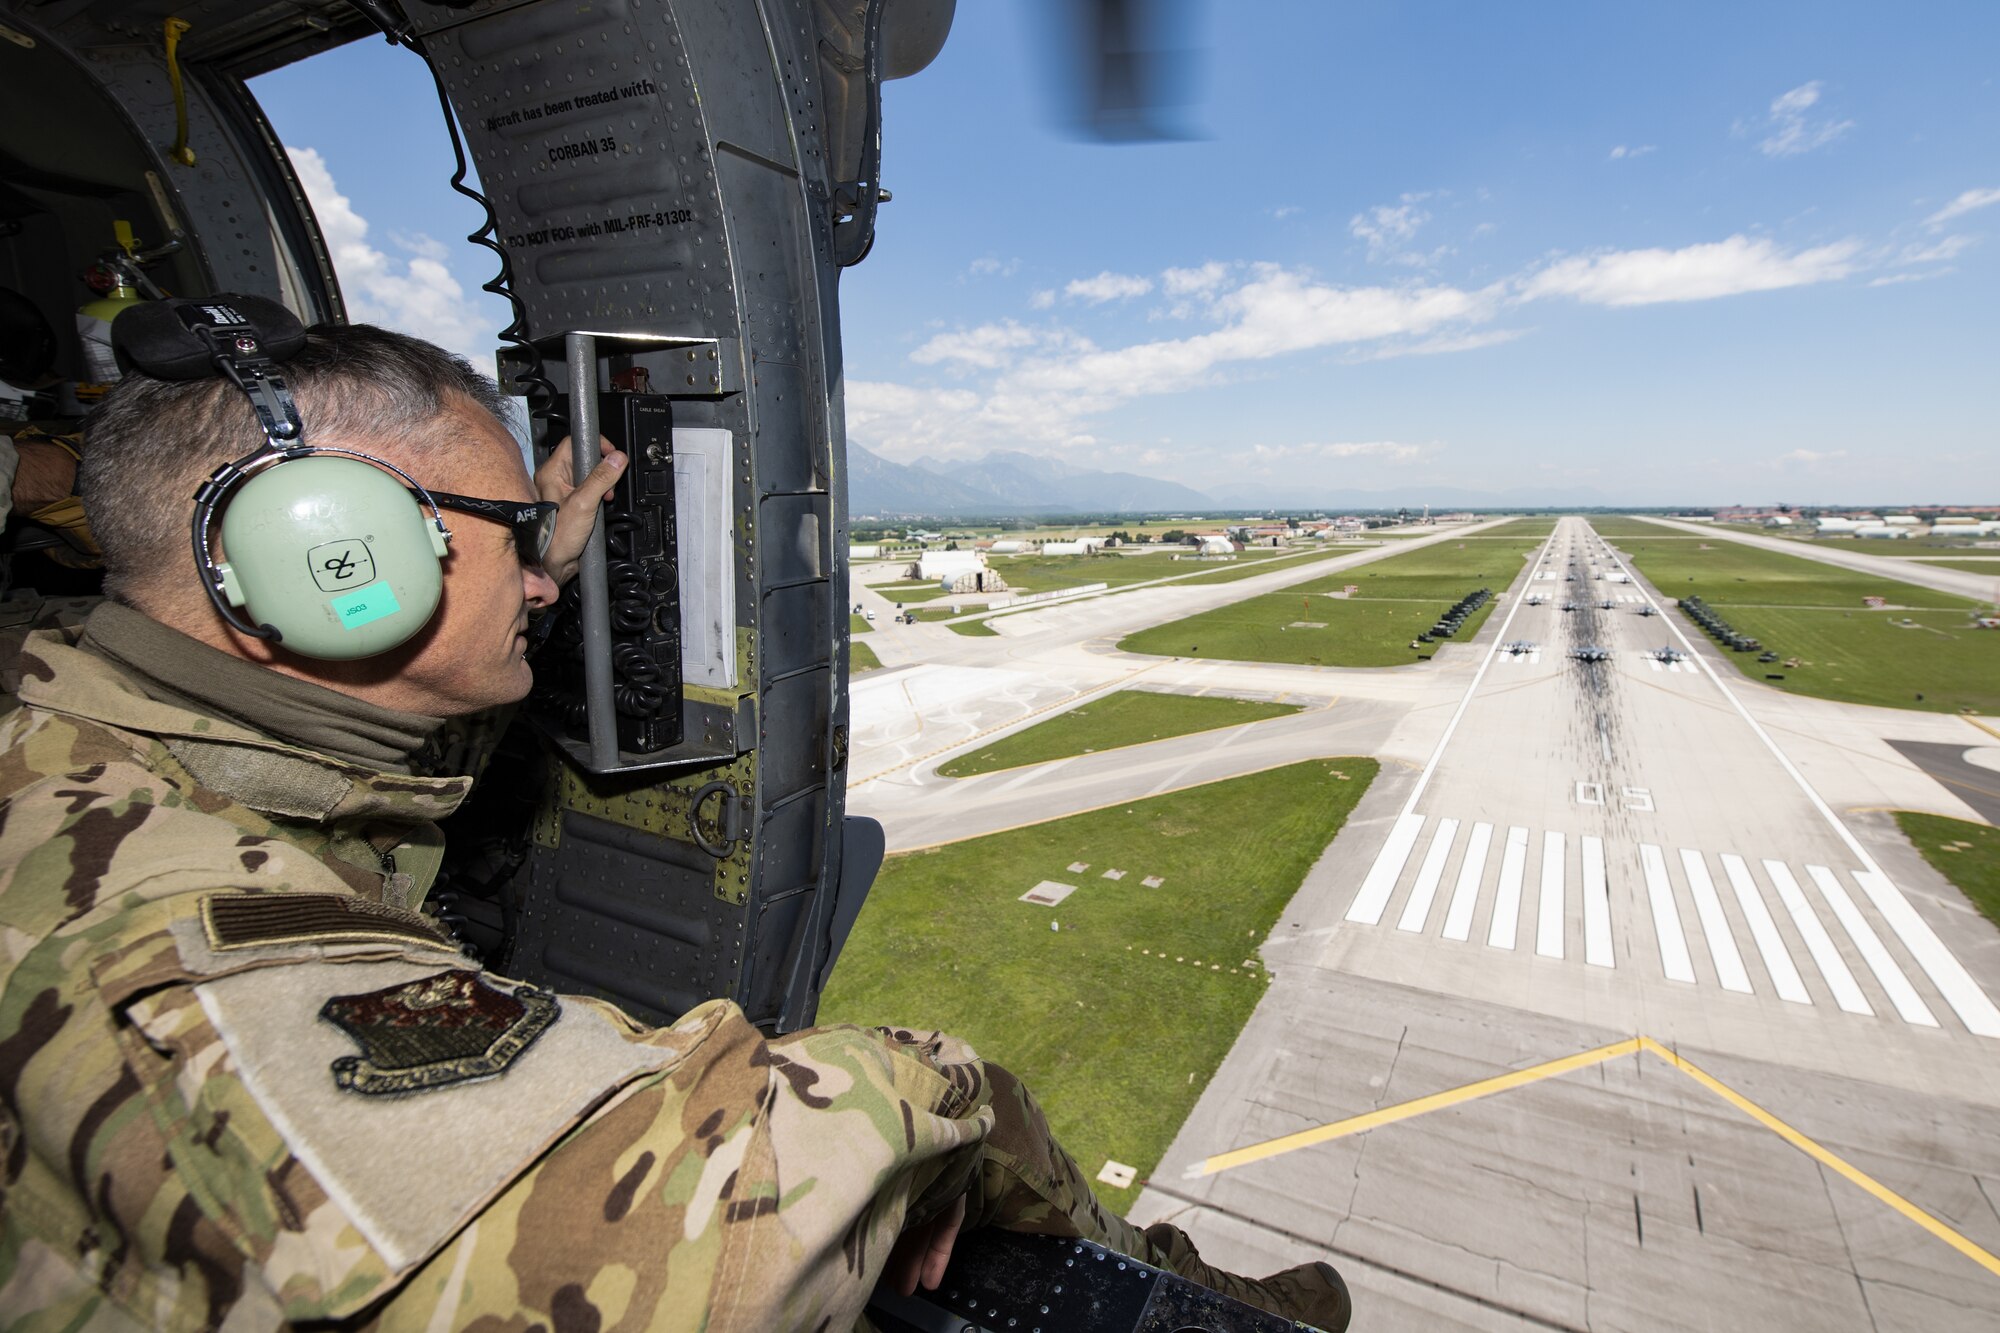 U.S. Air Force Brig. Gen. Daniel T. Lasica, 31st Fighter Wing commander, overlooks an elephant walk while on an HH-60G Pave Hawk helicopter over Aviano Air Base, Italy, June 1, 2020. Elephant walks are a show of force, demonstrating the might and power of the U.S. Air Force and its bases. (U.S. Air Force photo by Airman Thomas S. Keisler IV)